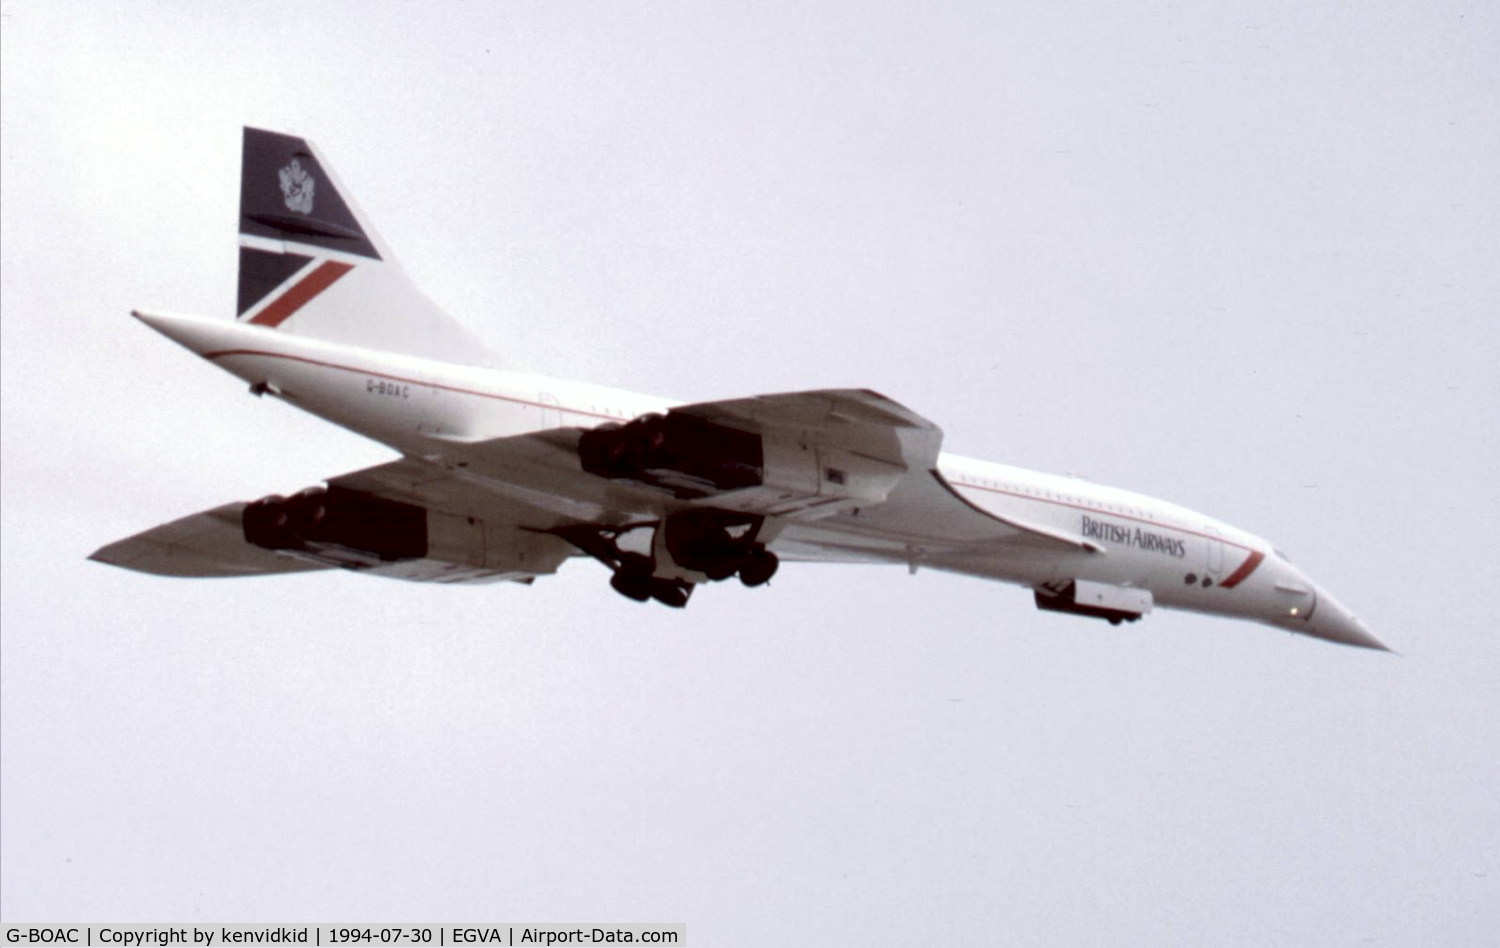 G-BOAC, 1975 Aerospatiale-BAC Concorde 1-102 C/N 100-004, G-BOAC departing Fairford with some very lucky passengers.